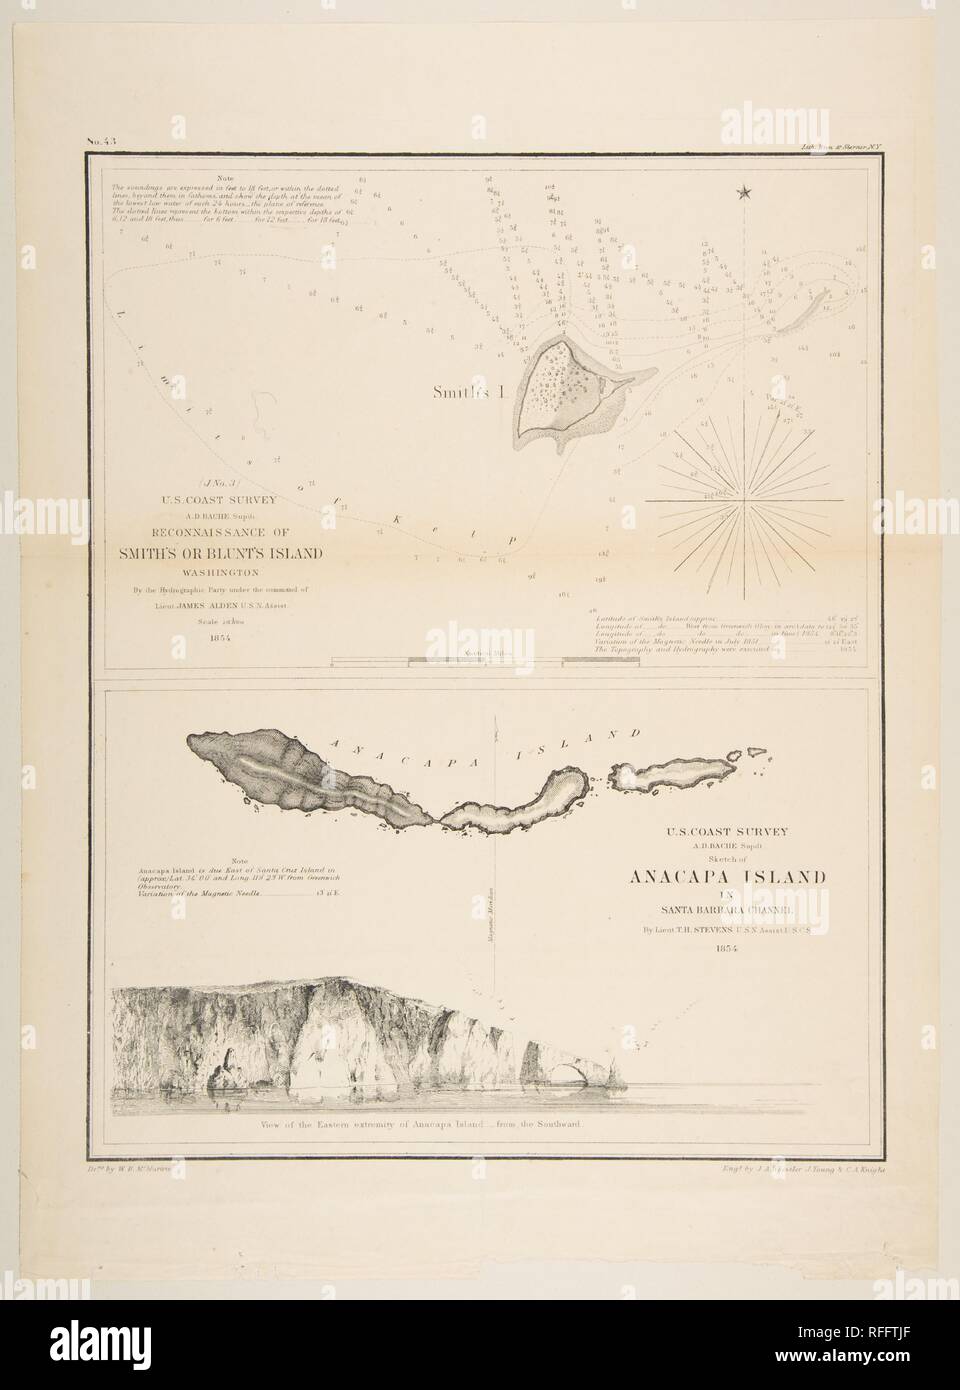 U.S. Coast Survey...Reconnaissance of Smith's or Blunt's Island, Washington / U.S. Coast Survey...Sketch of Anacapa Island in Santa Barbara Channel. Artist: James McNeill Whistler (American, Lowell, Massachusetts 1834-1903 London); Charles Knight (American, active 1854); John Young (American, active 1854); after William Birch McMurtrie (American, Philadelphia, Pennsylvania 1816-1872 Washington, D.C.). Dimensions: image: 11 3/4 x 9 5/16 in. (29.8 x 23.7 cm)  sheet: 14 1/2 x 10 11/16 in. (36.8 x 27.1 cm). Date: 1854-57. Museum: Metropolitan Museum of Art, New York, USA. Stock Photo